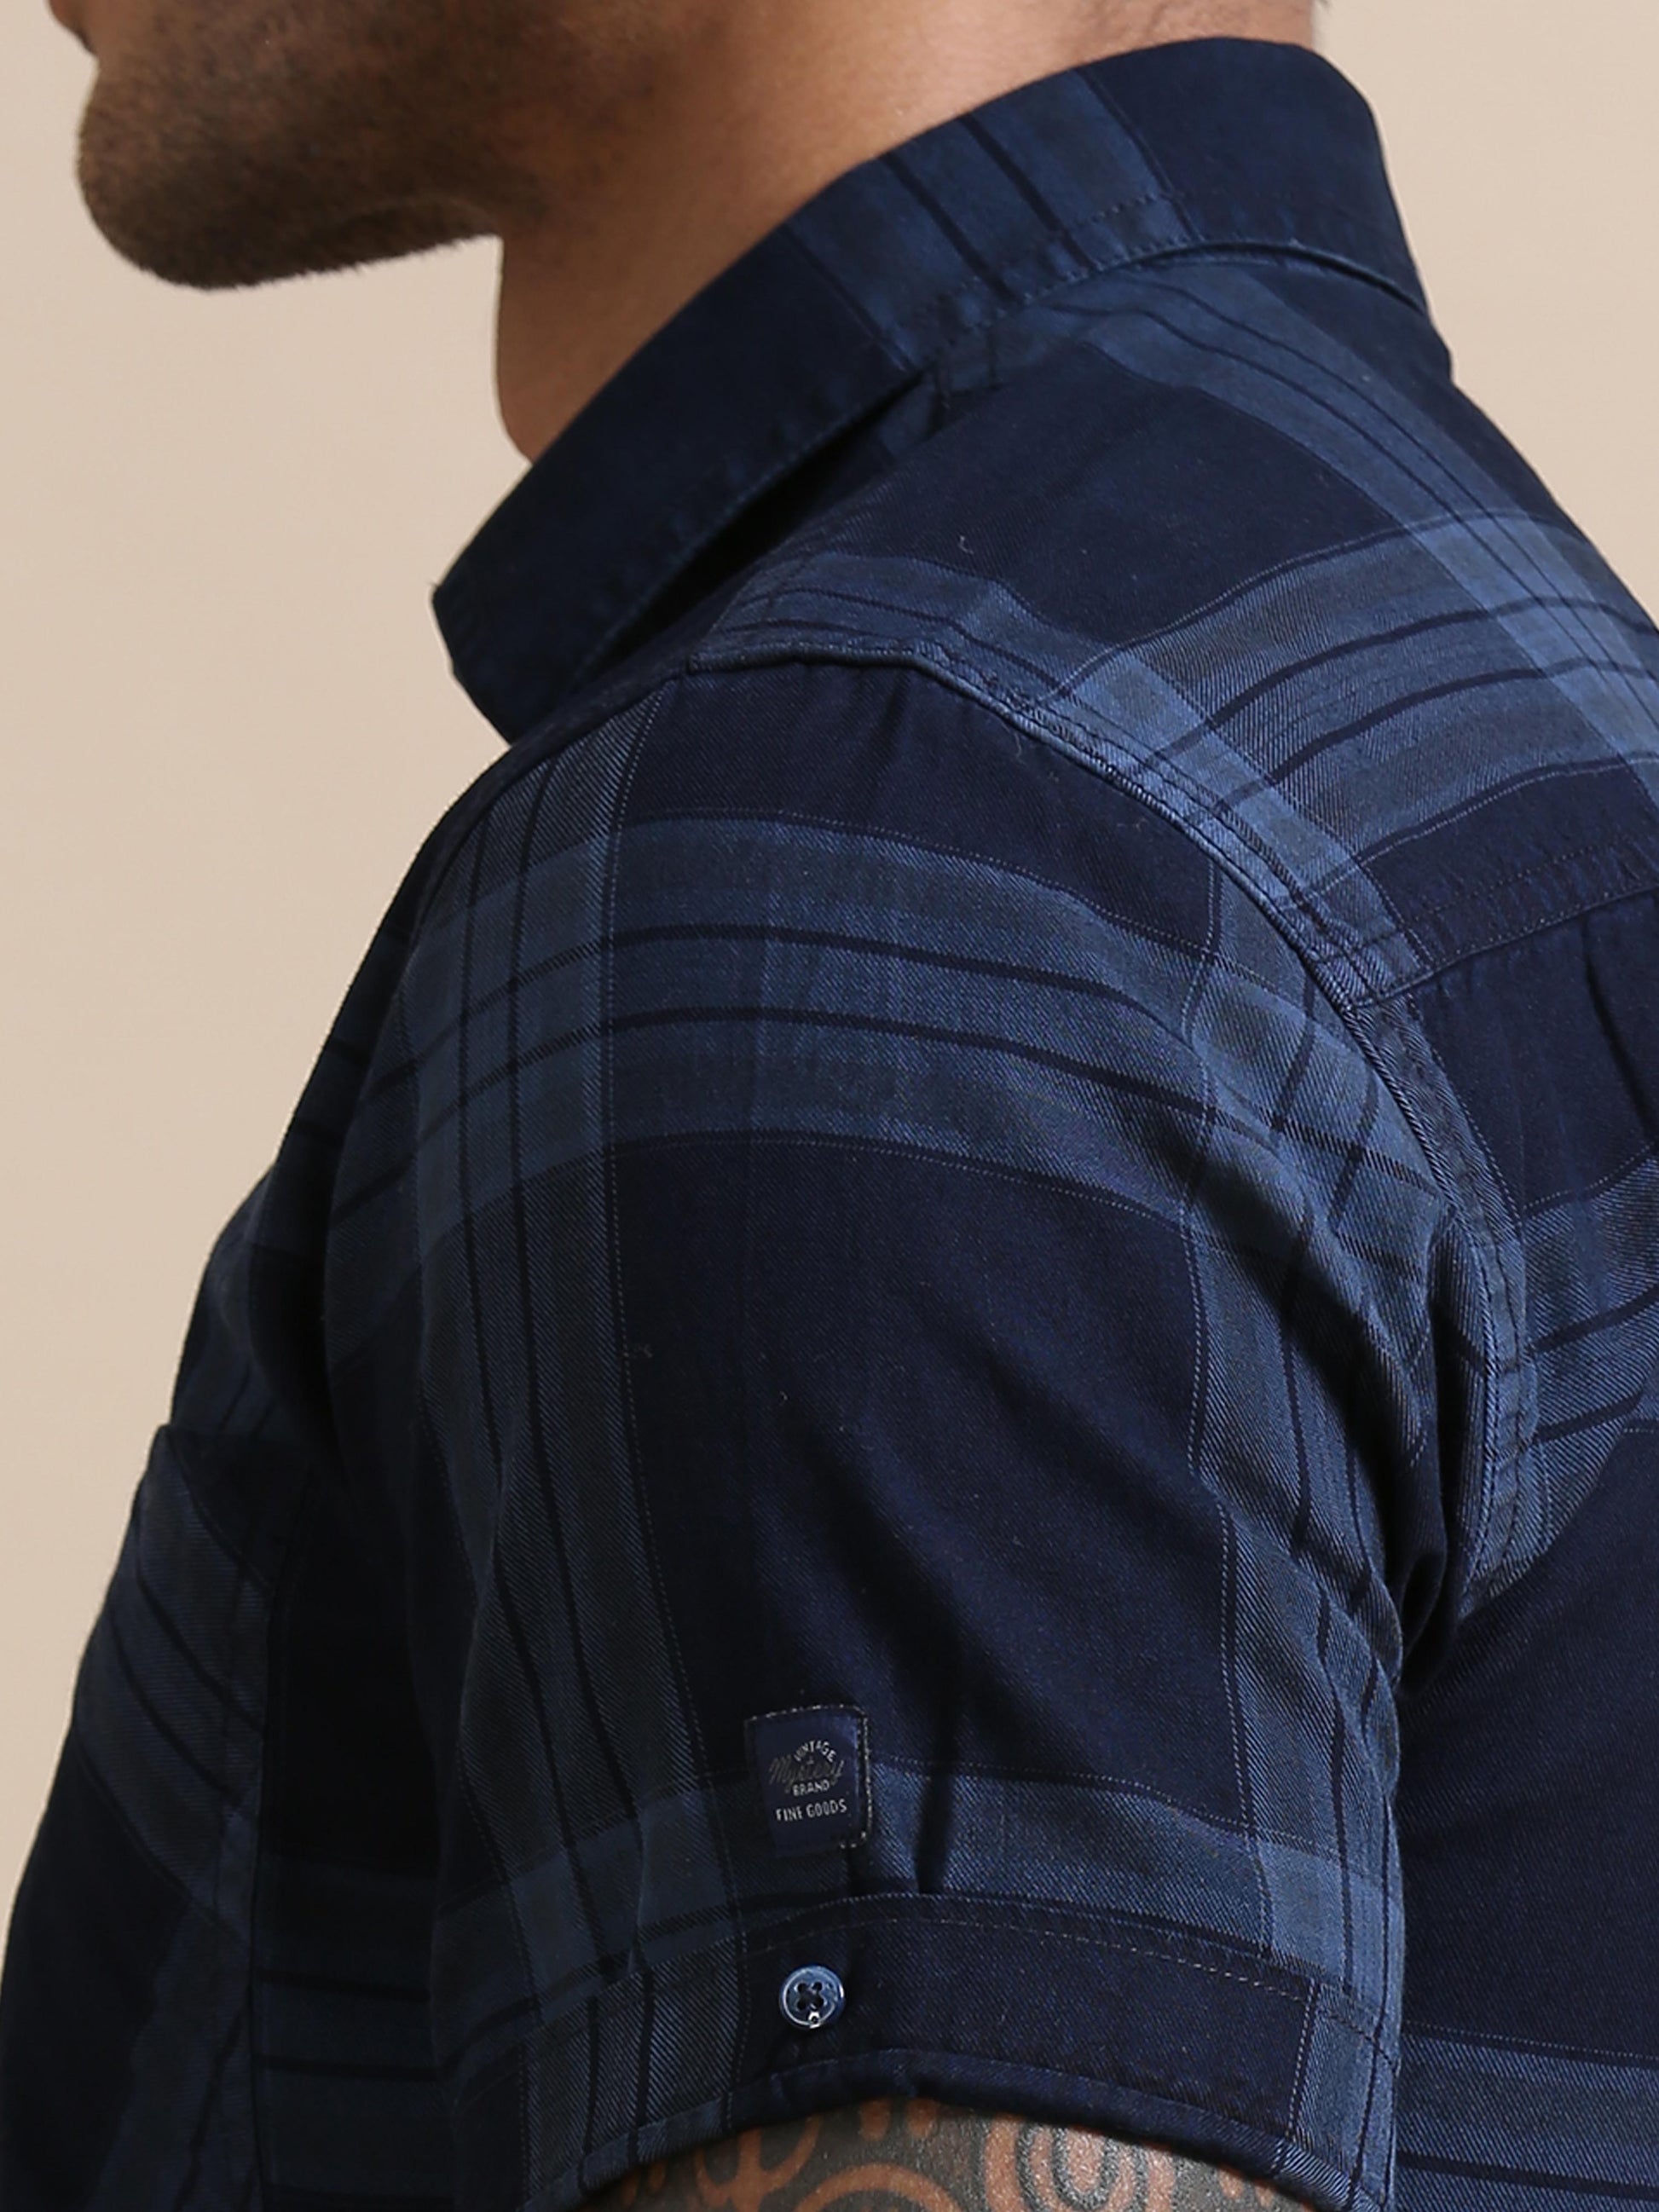 Lineage Blue And Black Check Shirt Half Sleeves for Men 